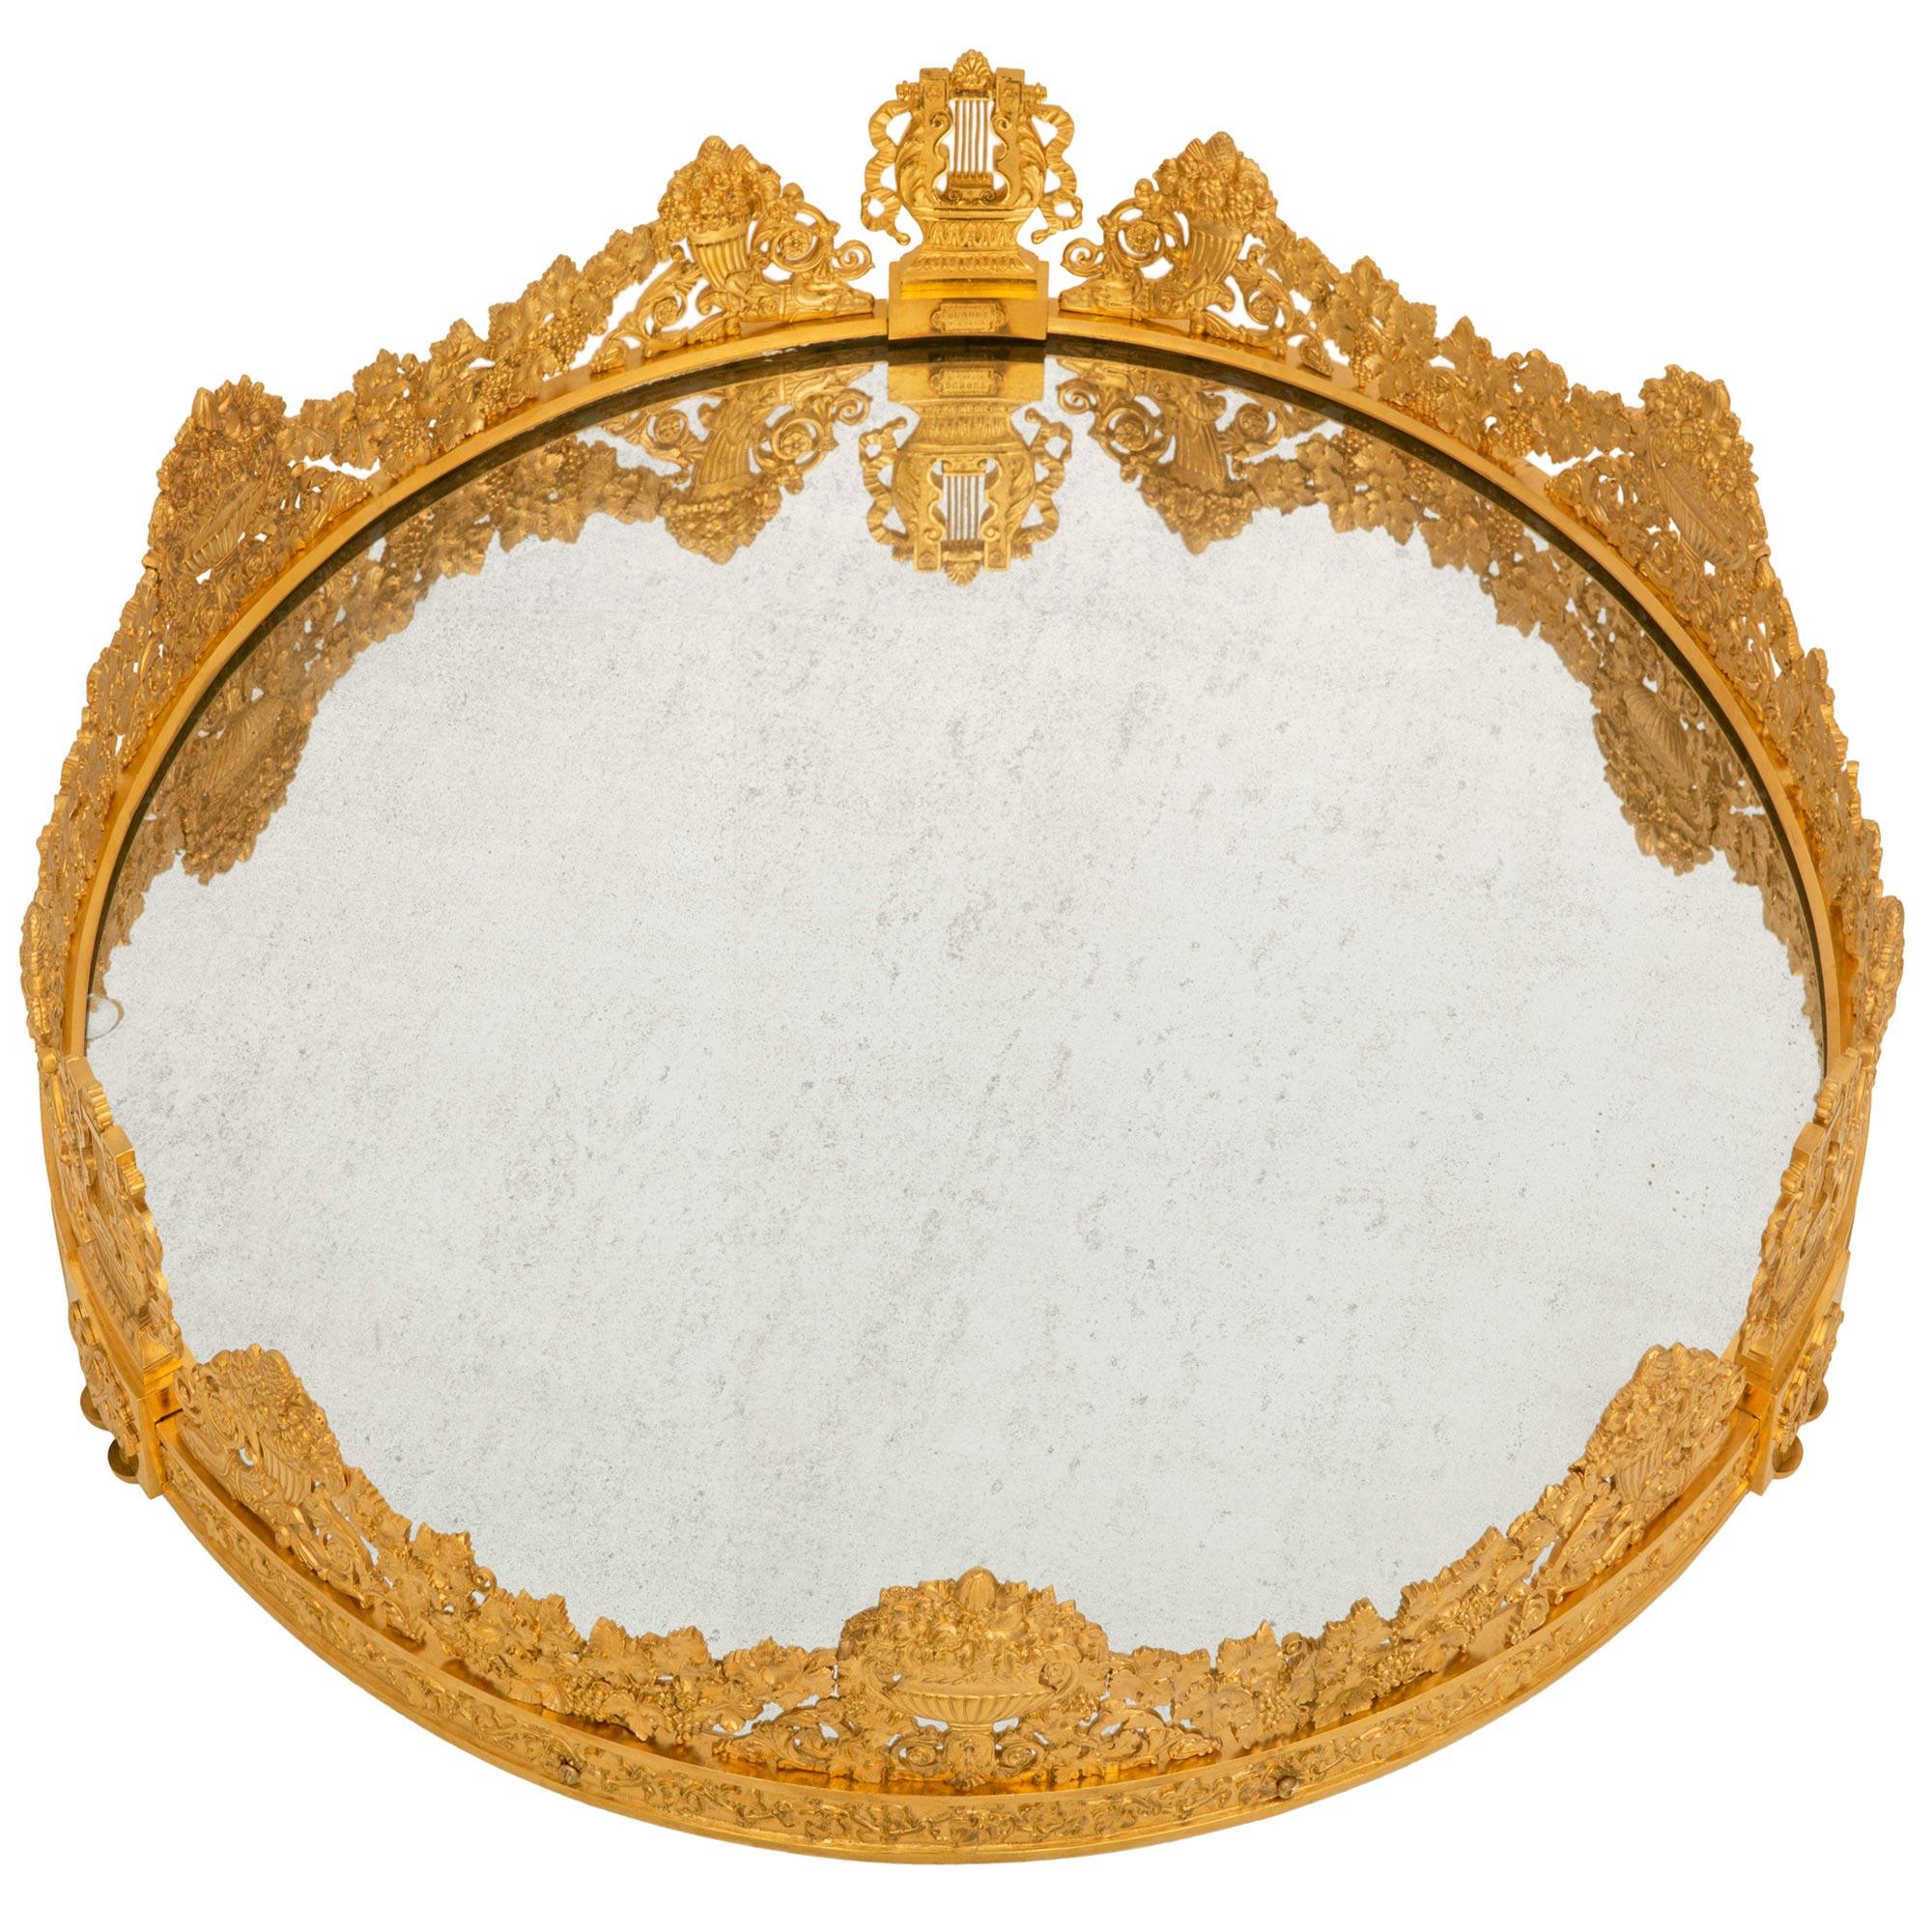 A most impressive and large scale French 19th century Charles X Period Ormolu and Mirror centerpiece plateau, signed Dunouy Fait a Paris. The Sur Tout de Table is raised by three double demi lune Ormolu supports below blocks which are decorated by